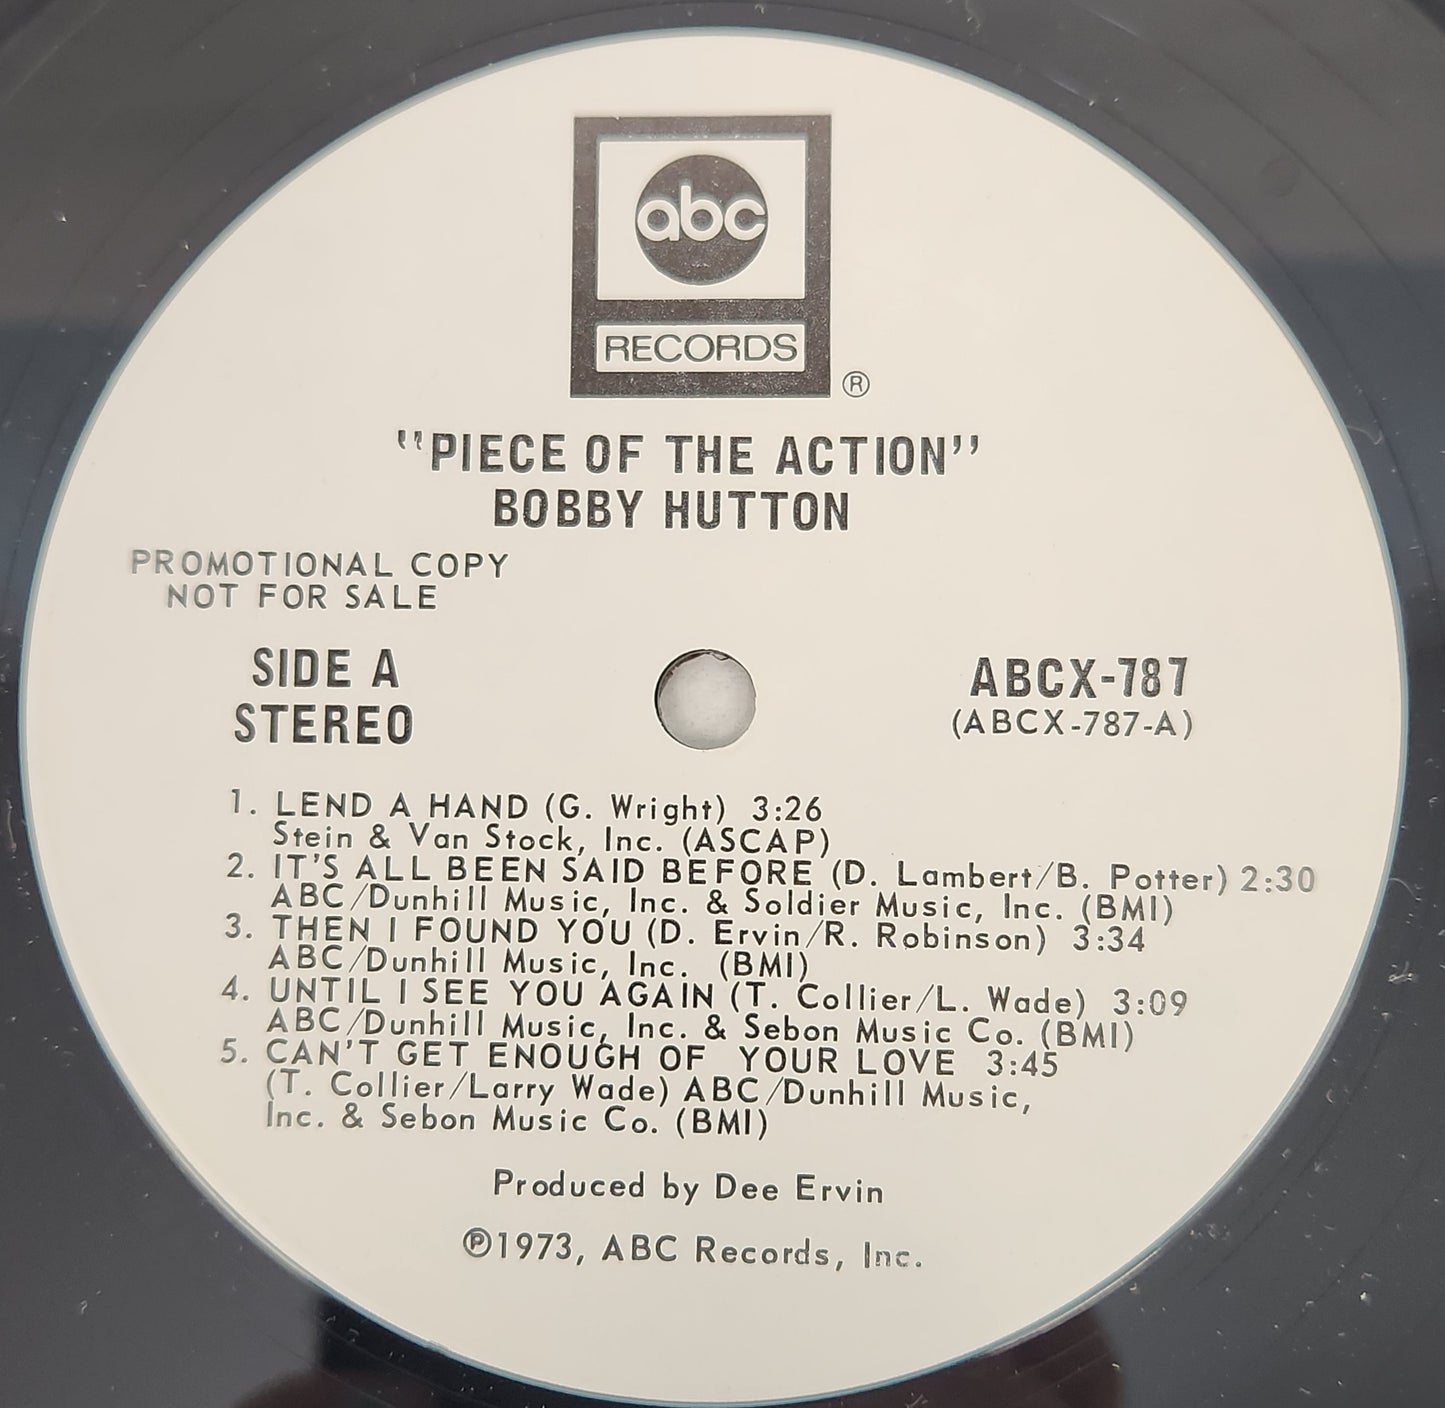 Bobby Hutton "Piece Of The Action" 1973 Funk & Soul Promo Album